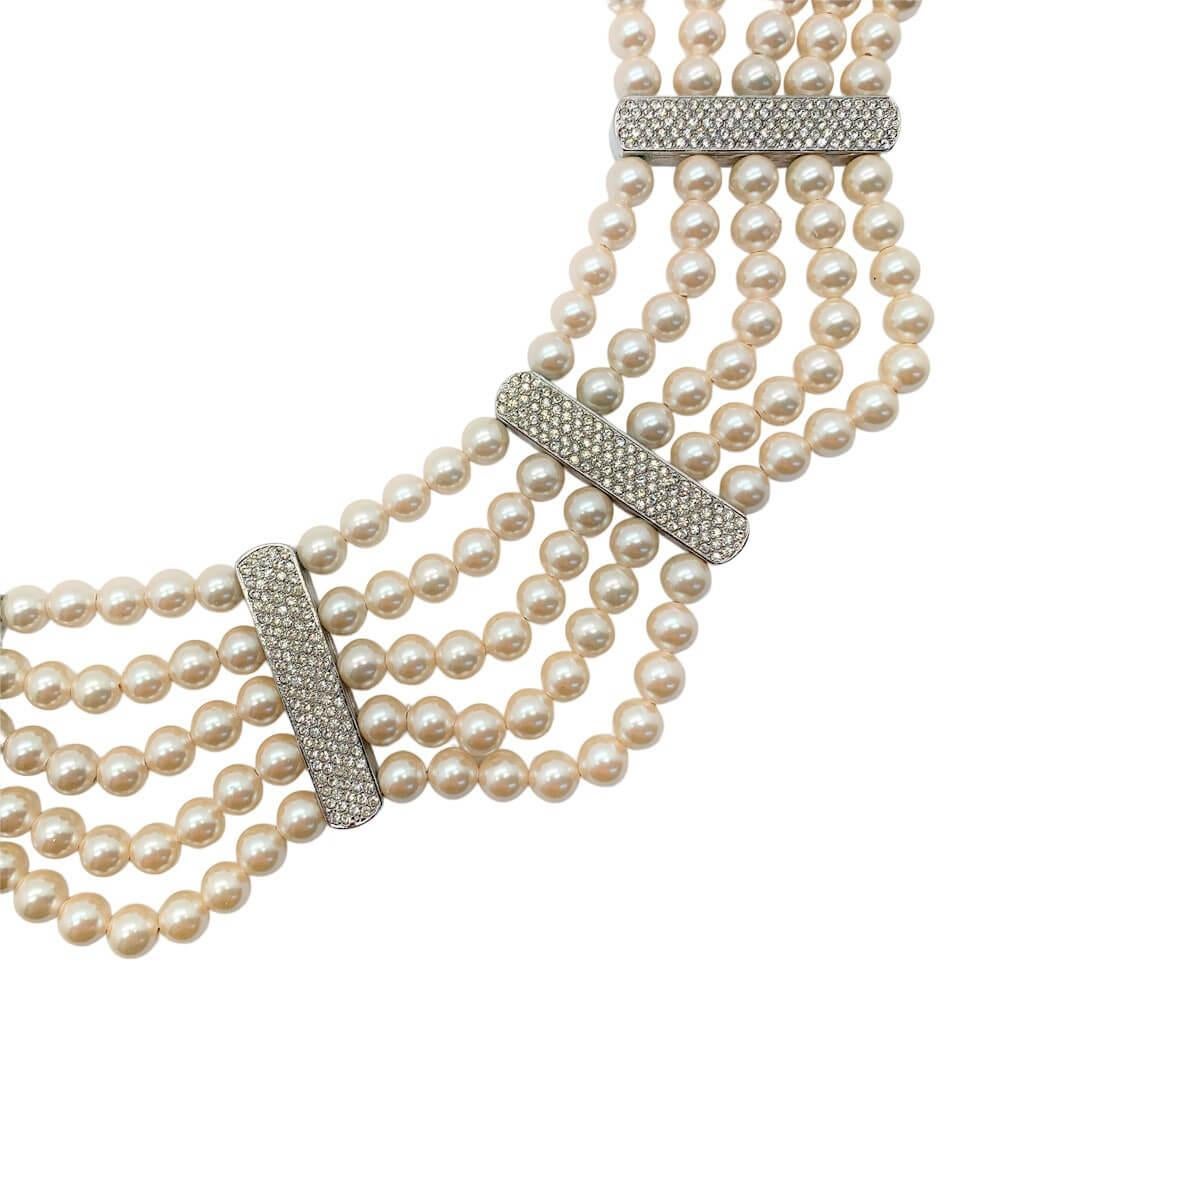 A truly special vintage Dior pearl collar from the 1980s with pearls of the most incredible colour. Featuring a fabulous five rows of lustrous glass simulated pearls punctuated with contrasting crystal stations. All in all, giving the timeless feel